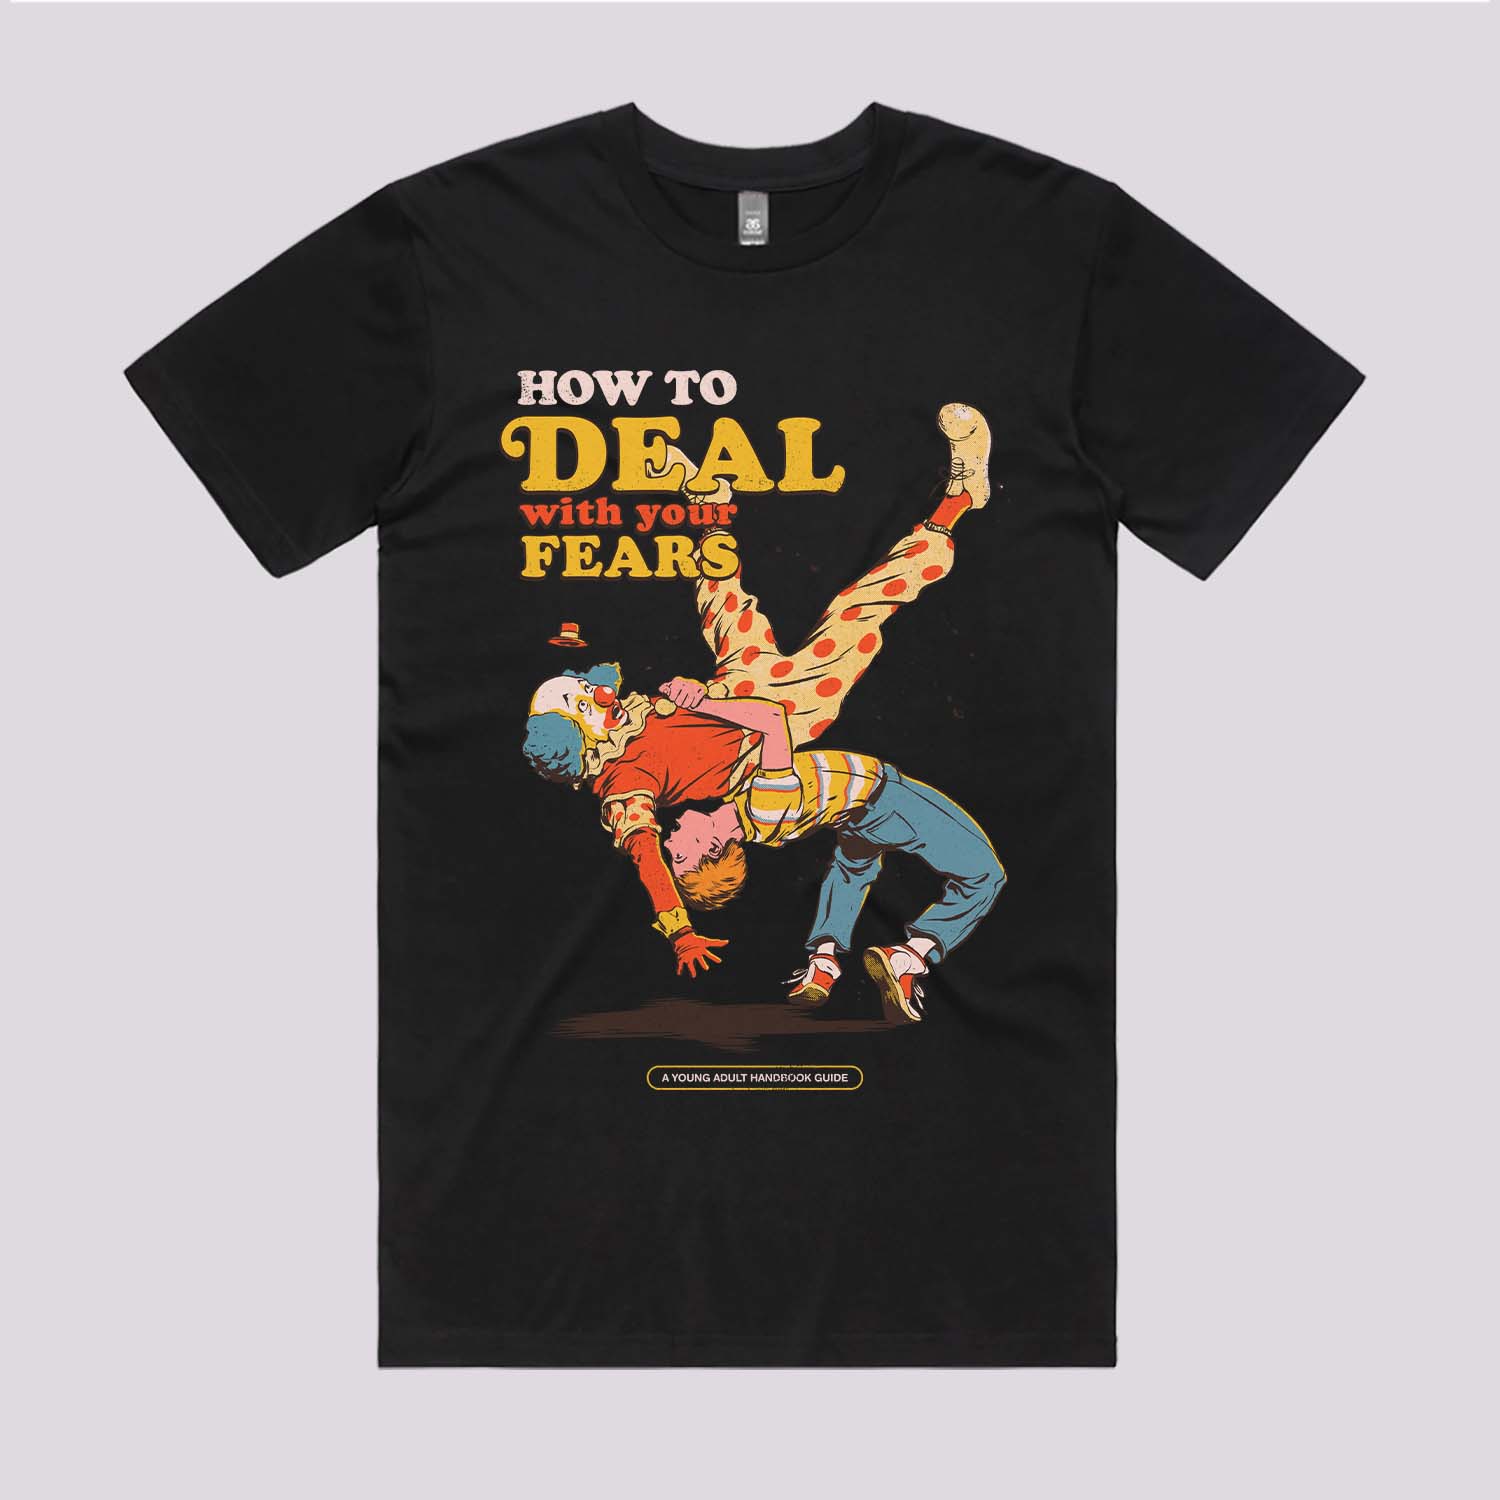 How To Deal With Your Fears T-Shirt